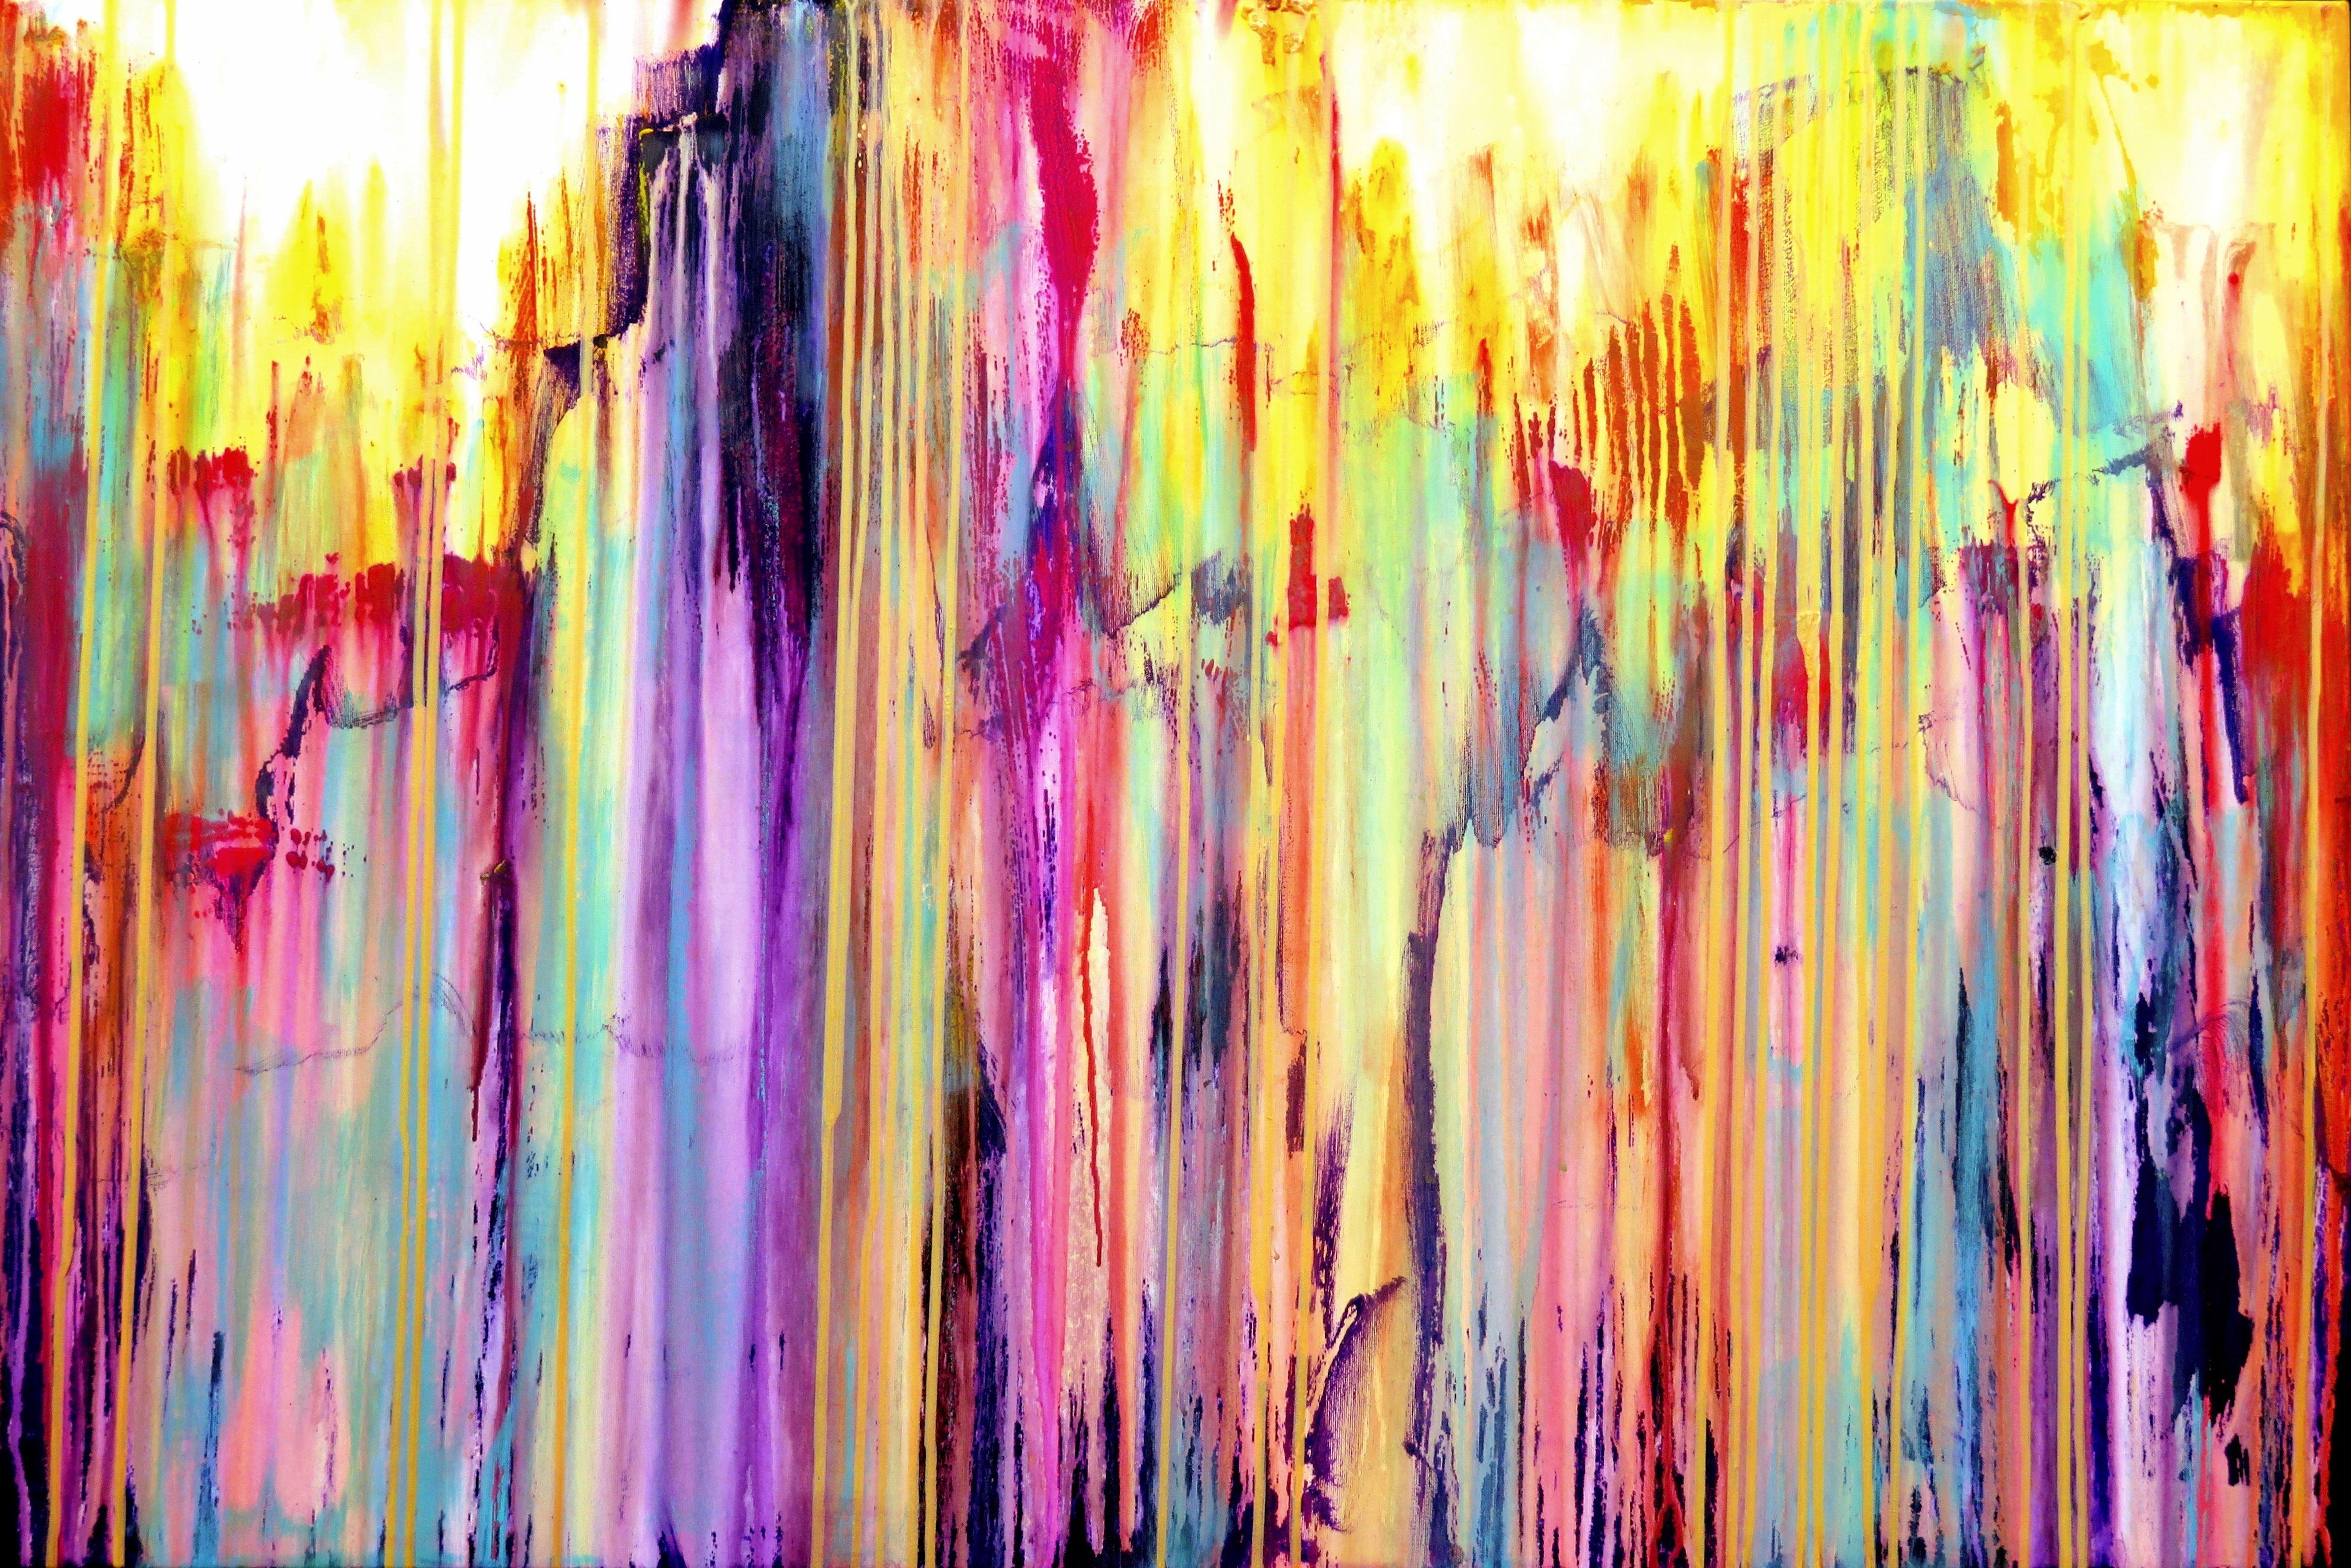 Carla Sá Fernandes Abstract Painting - The Emotional Creation #158, Painting, Acrylic on Canvas